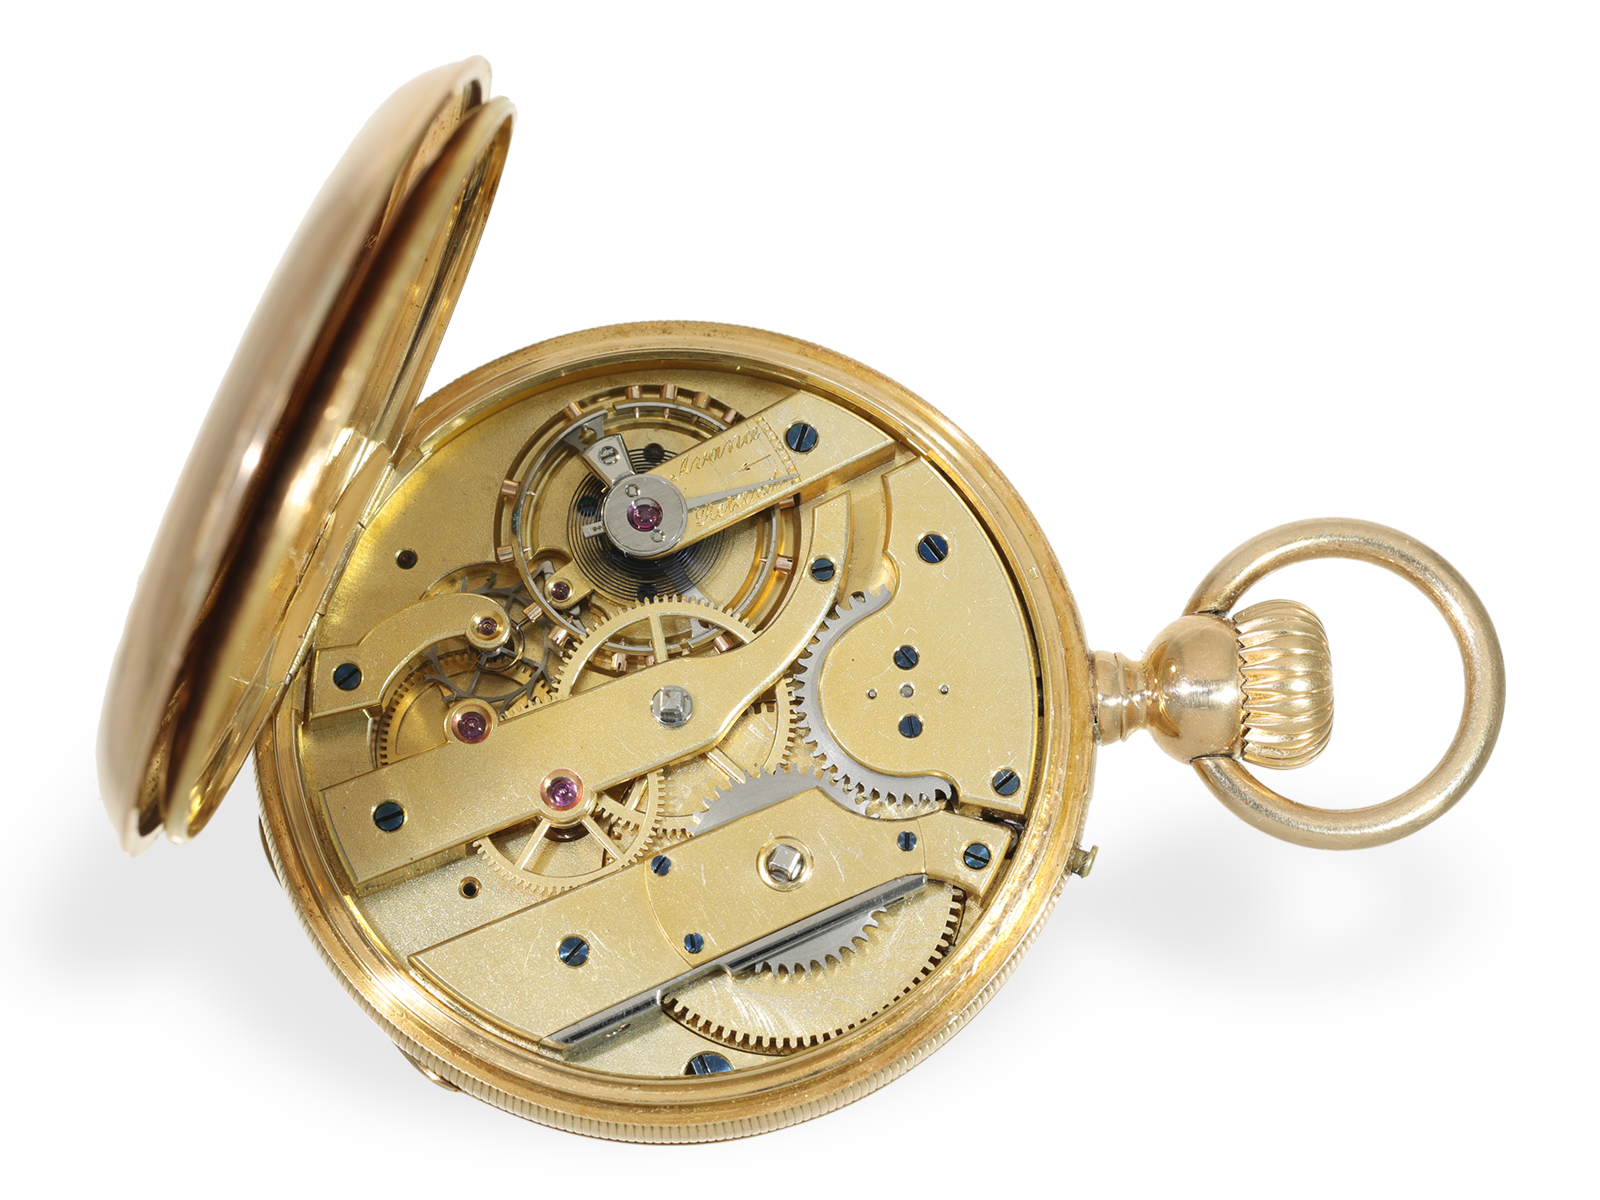 Pocket watch: early precision keyless pocket watch, probably Le Coultre, ca. 1865 - Image 3 of 5